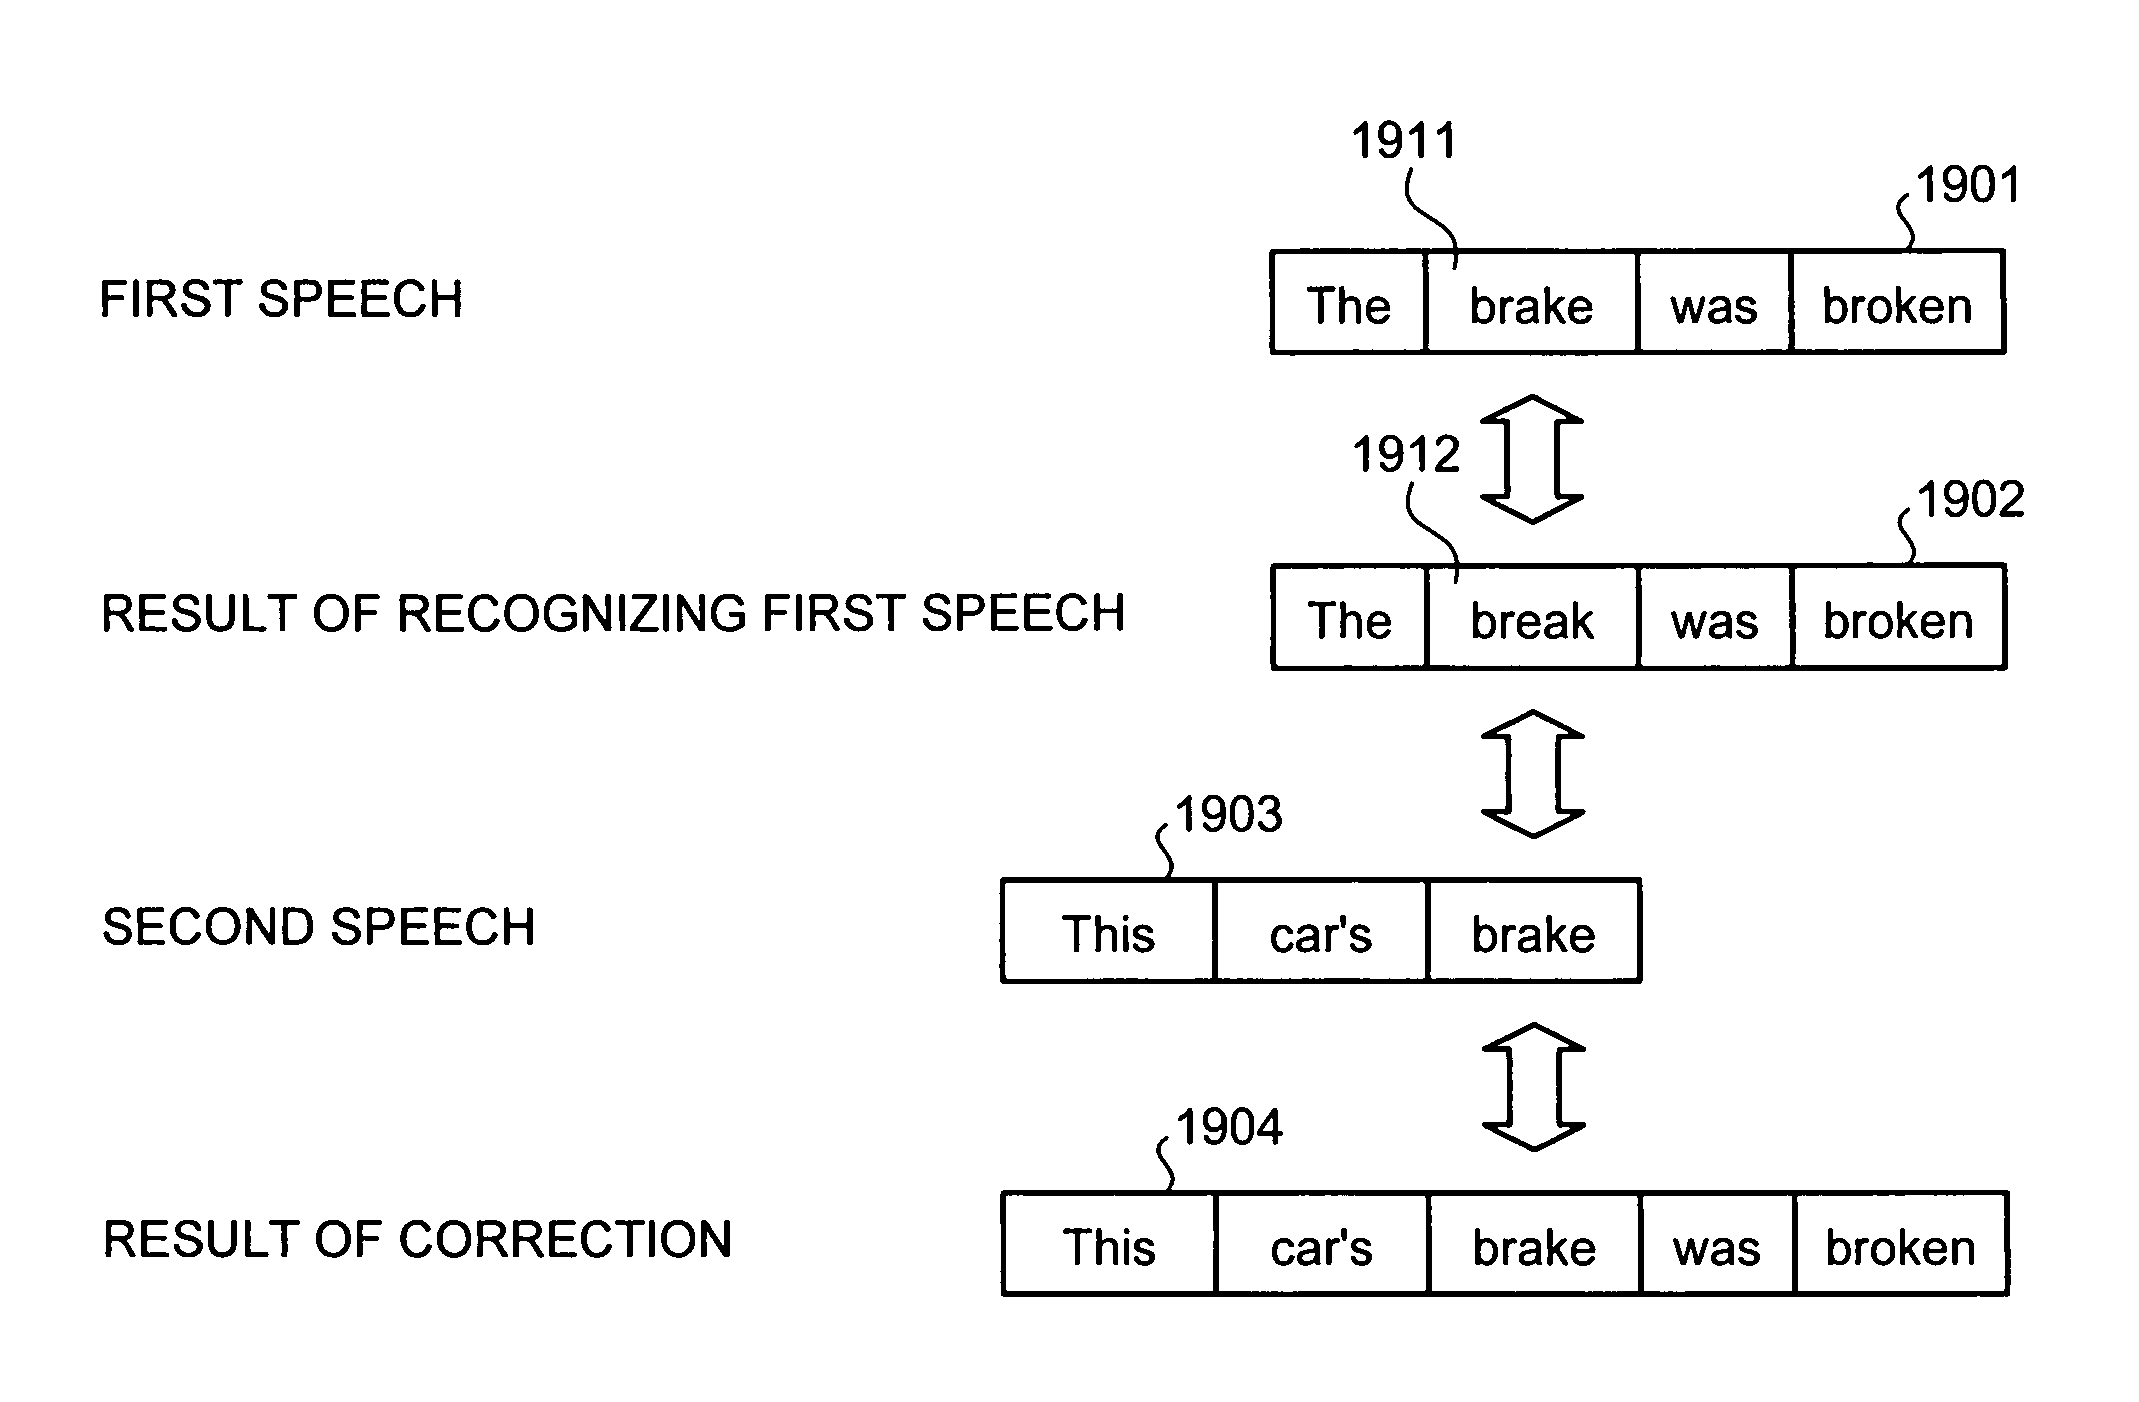 Apparatus, method and computer program product for recognizing speech